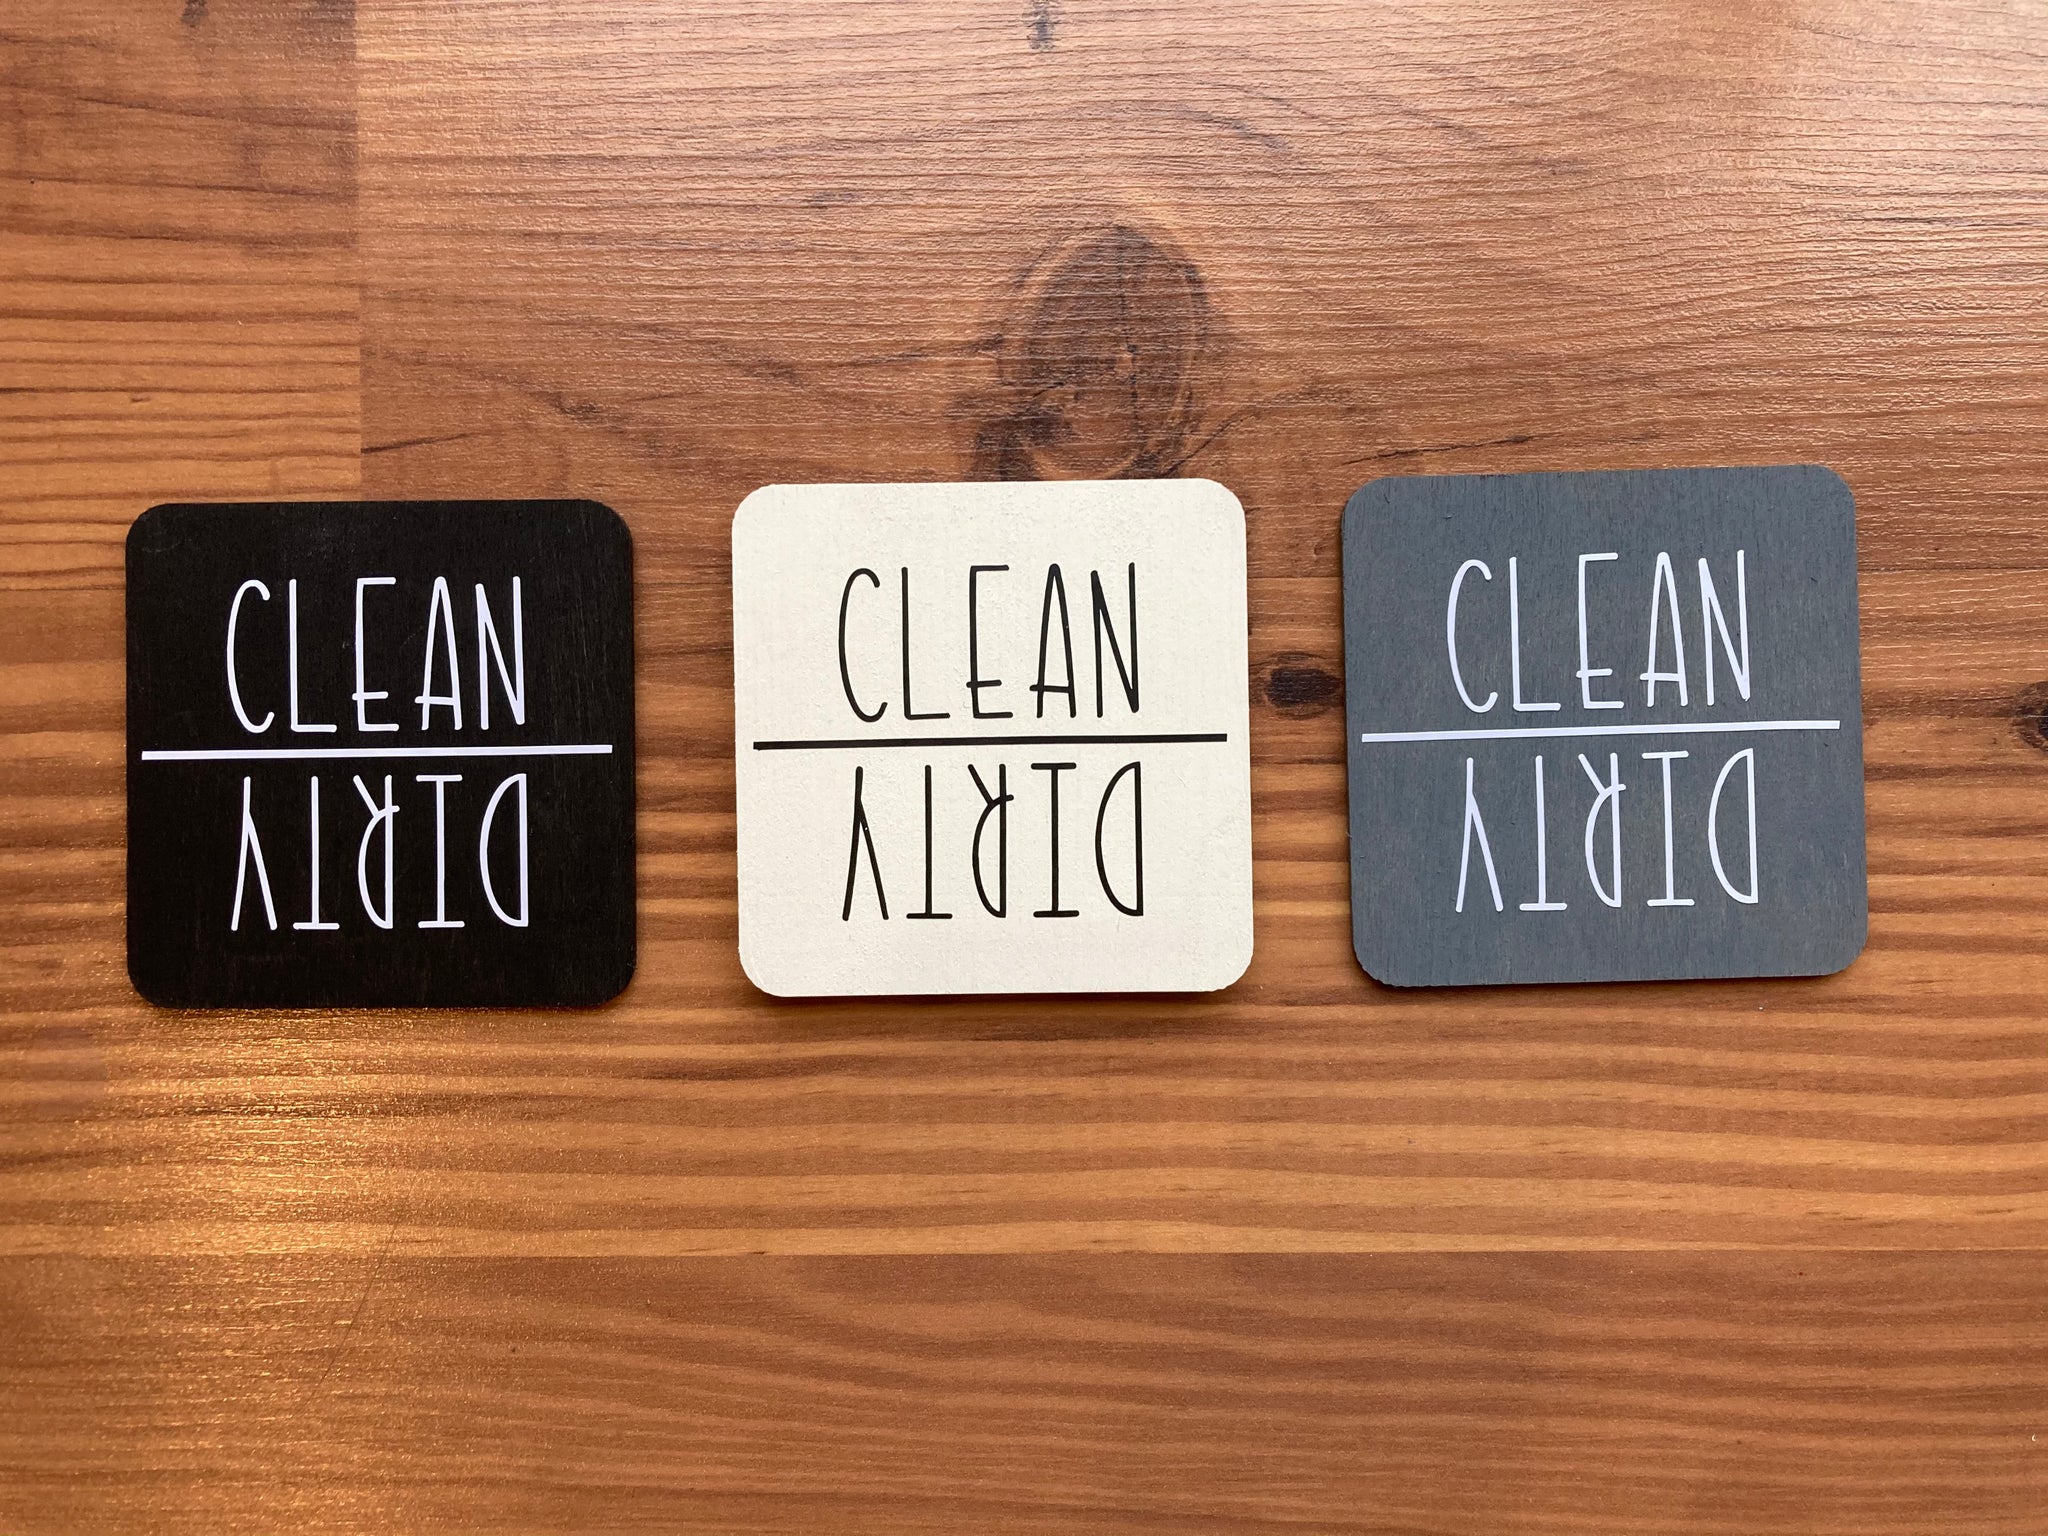 DIY Clean & Dirty Dishwasher Magnet With Free Printable Template